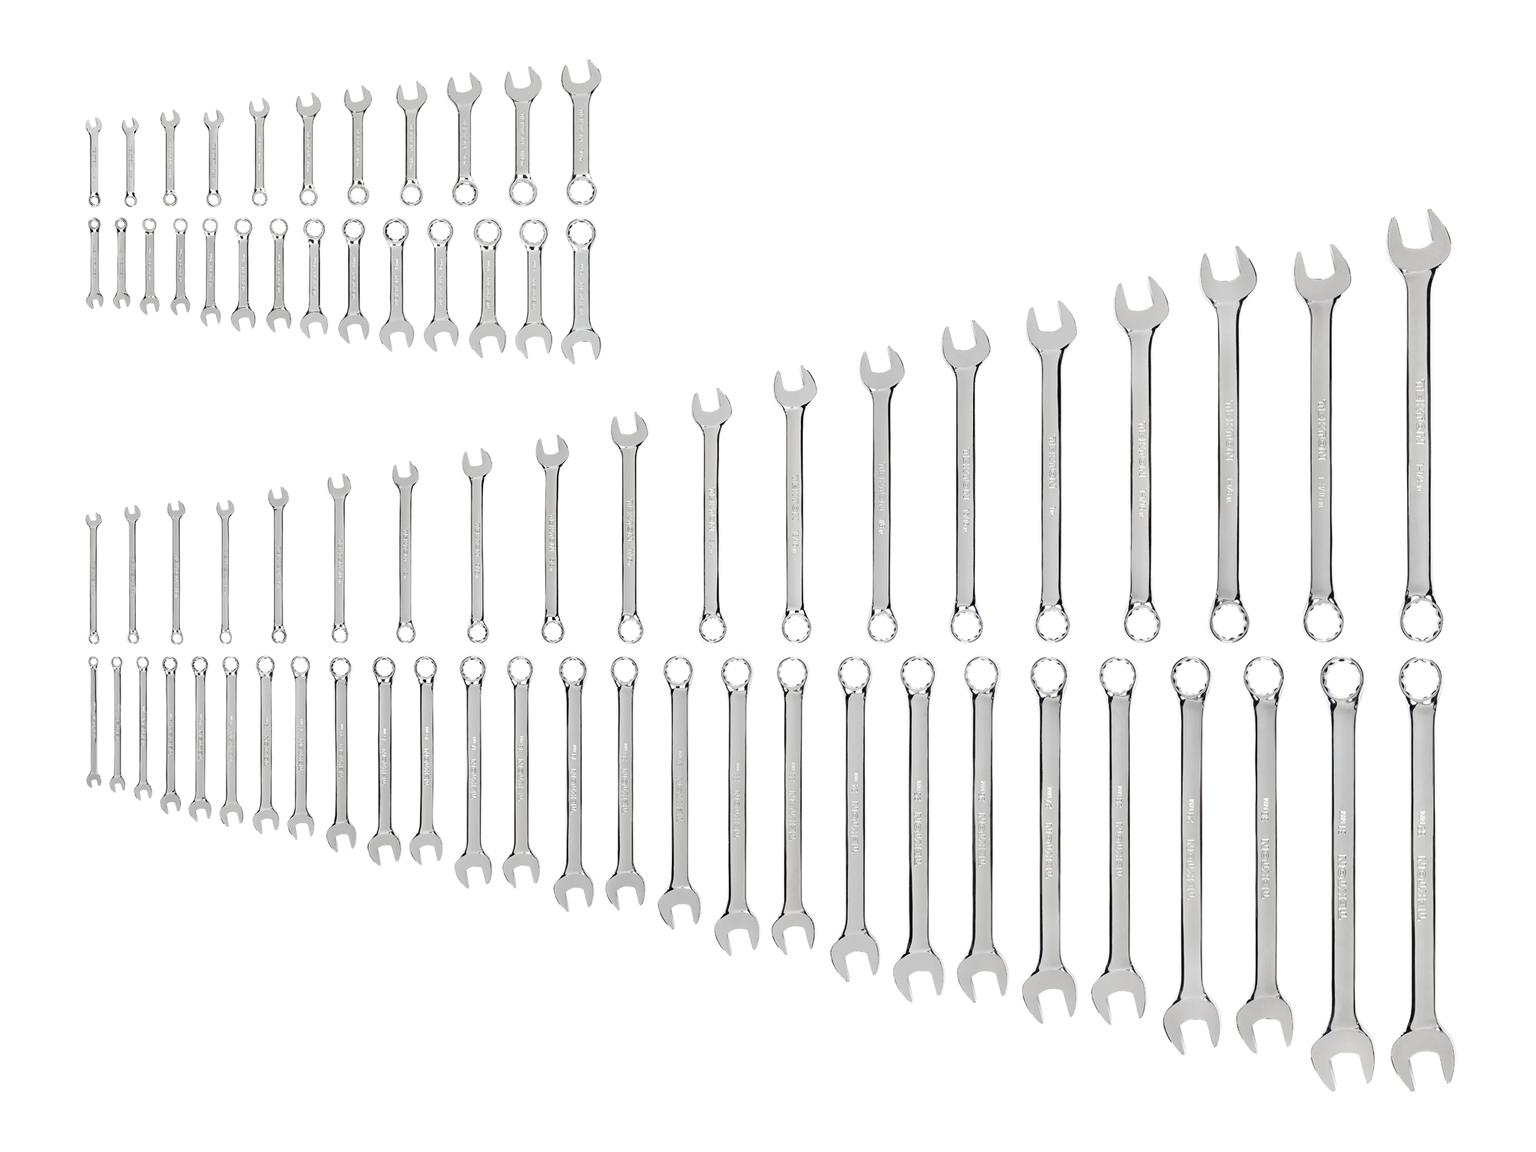 Stubby and Standard Length Combination Wrench Set (71-Piece)